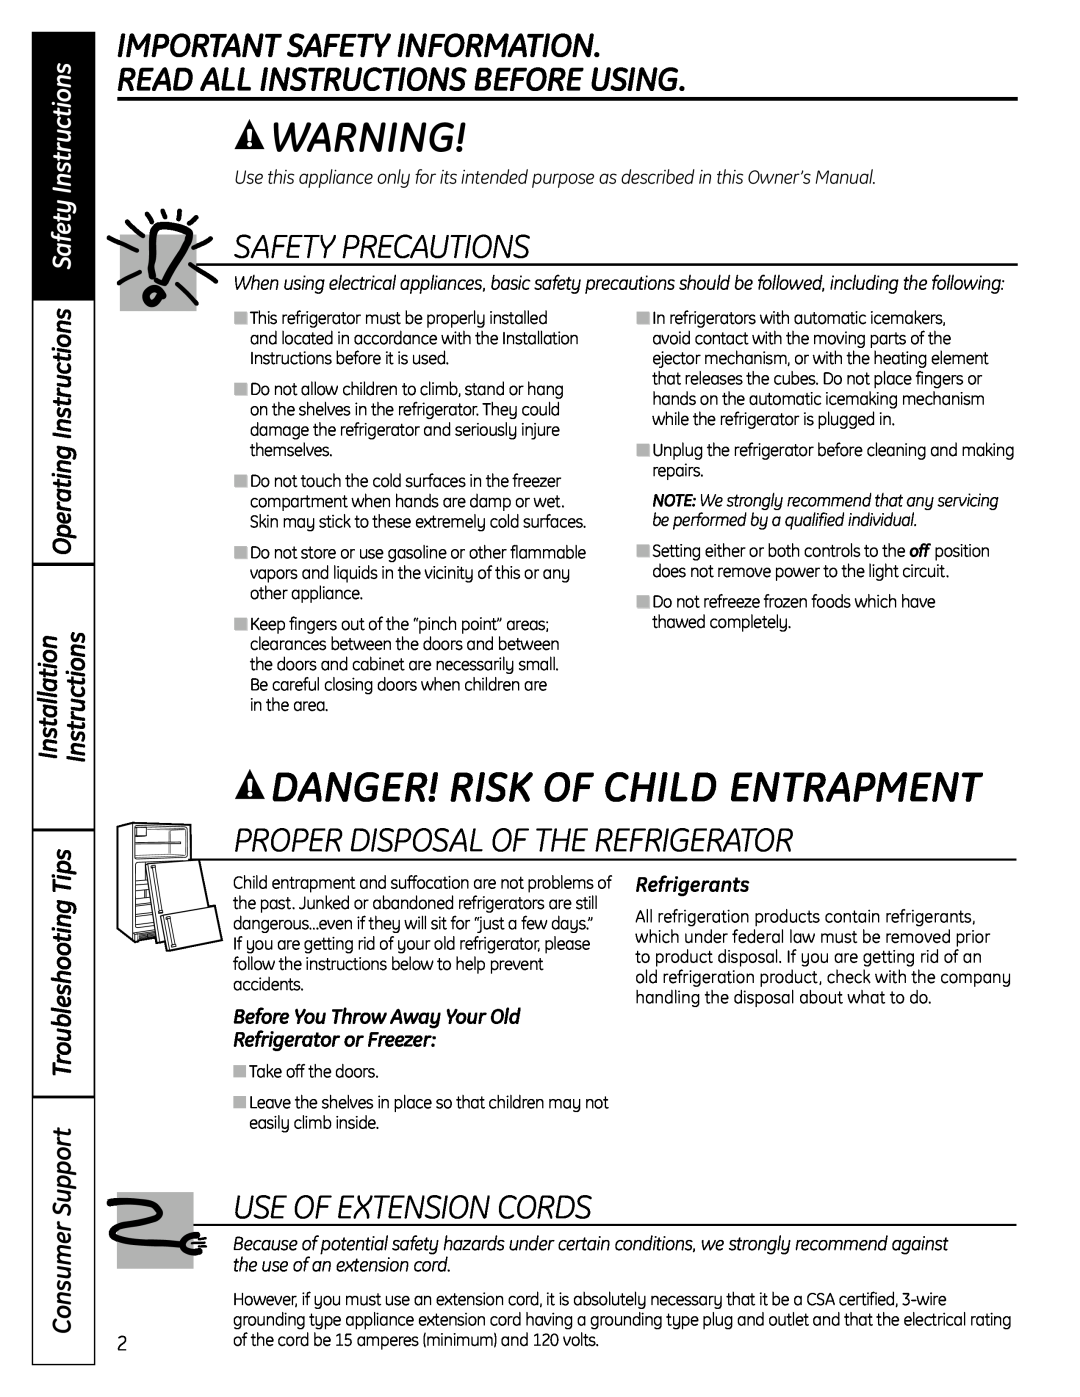 Moffat PFSS6SKXSS Danger! Risk Of Child Entrapment, Important Safety Information, Read All Instructions Before Using 